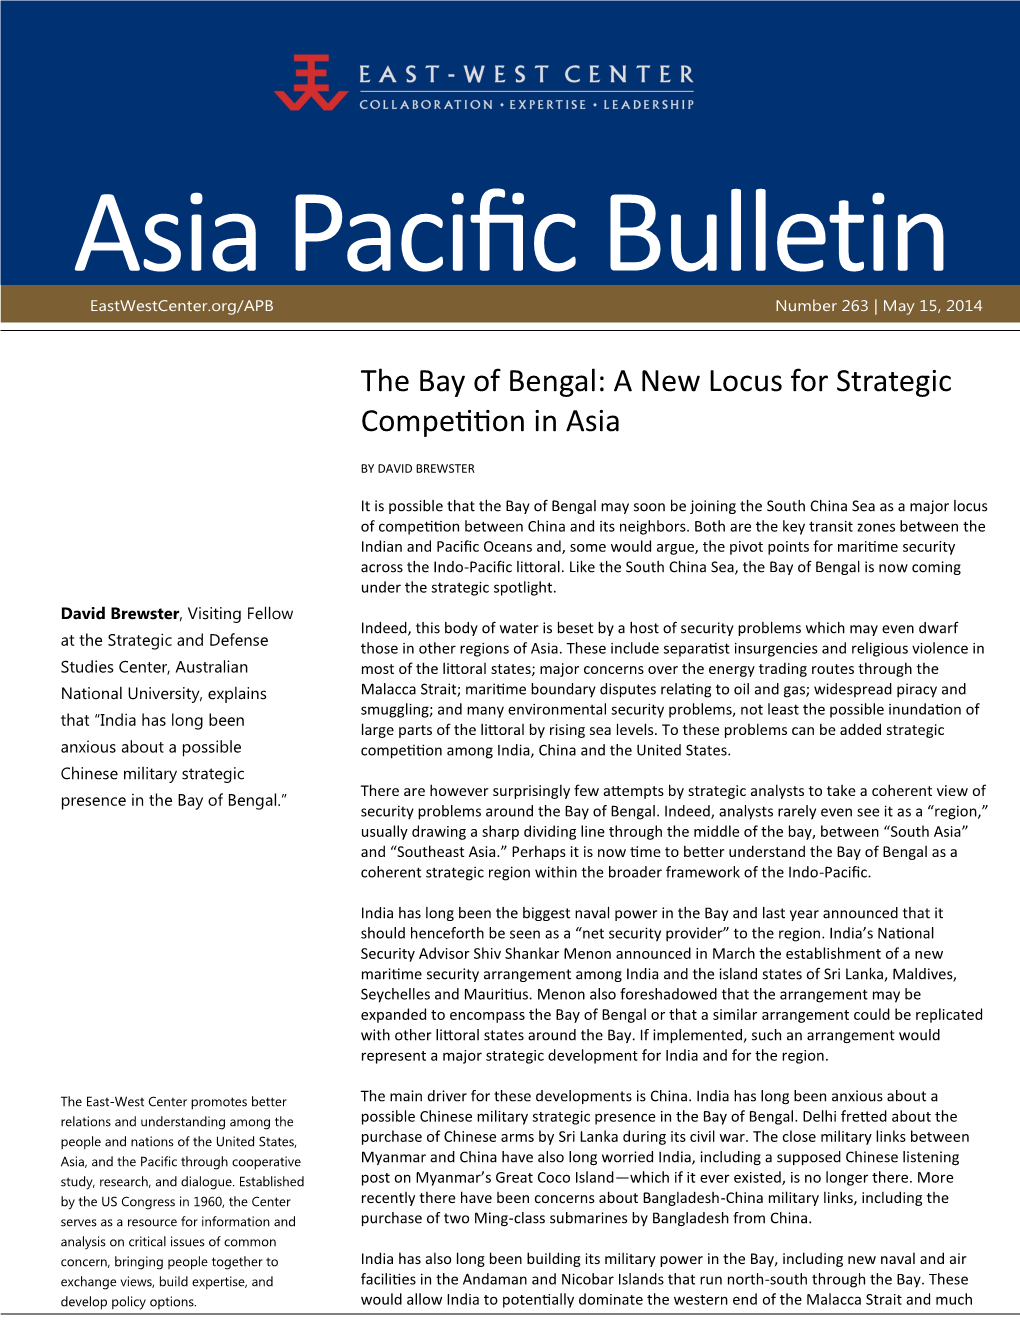 The Bay of Bengal: a New Locus for Strategic Competition in Asia